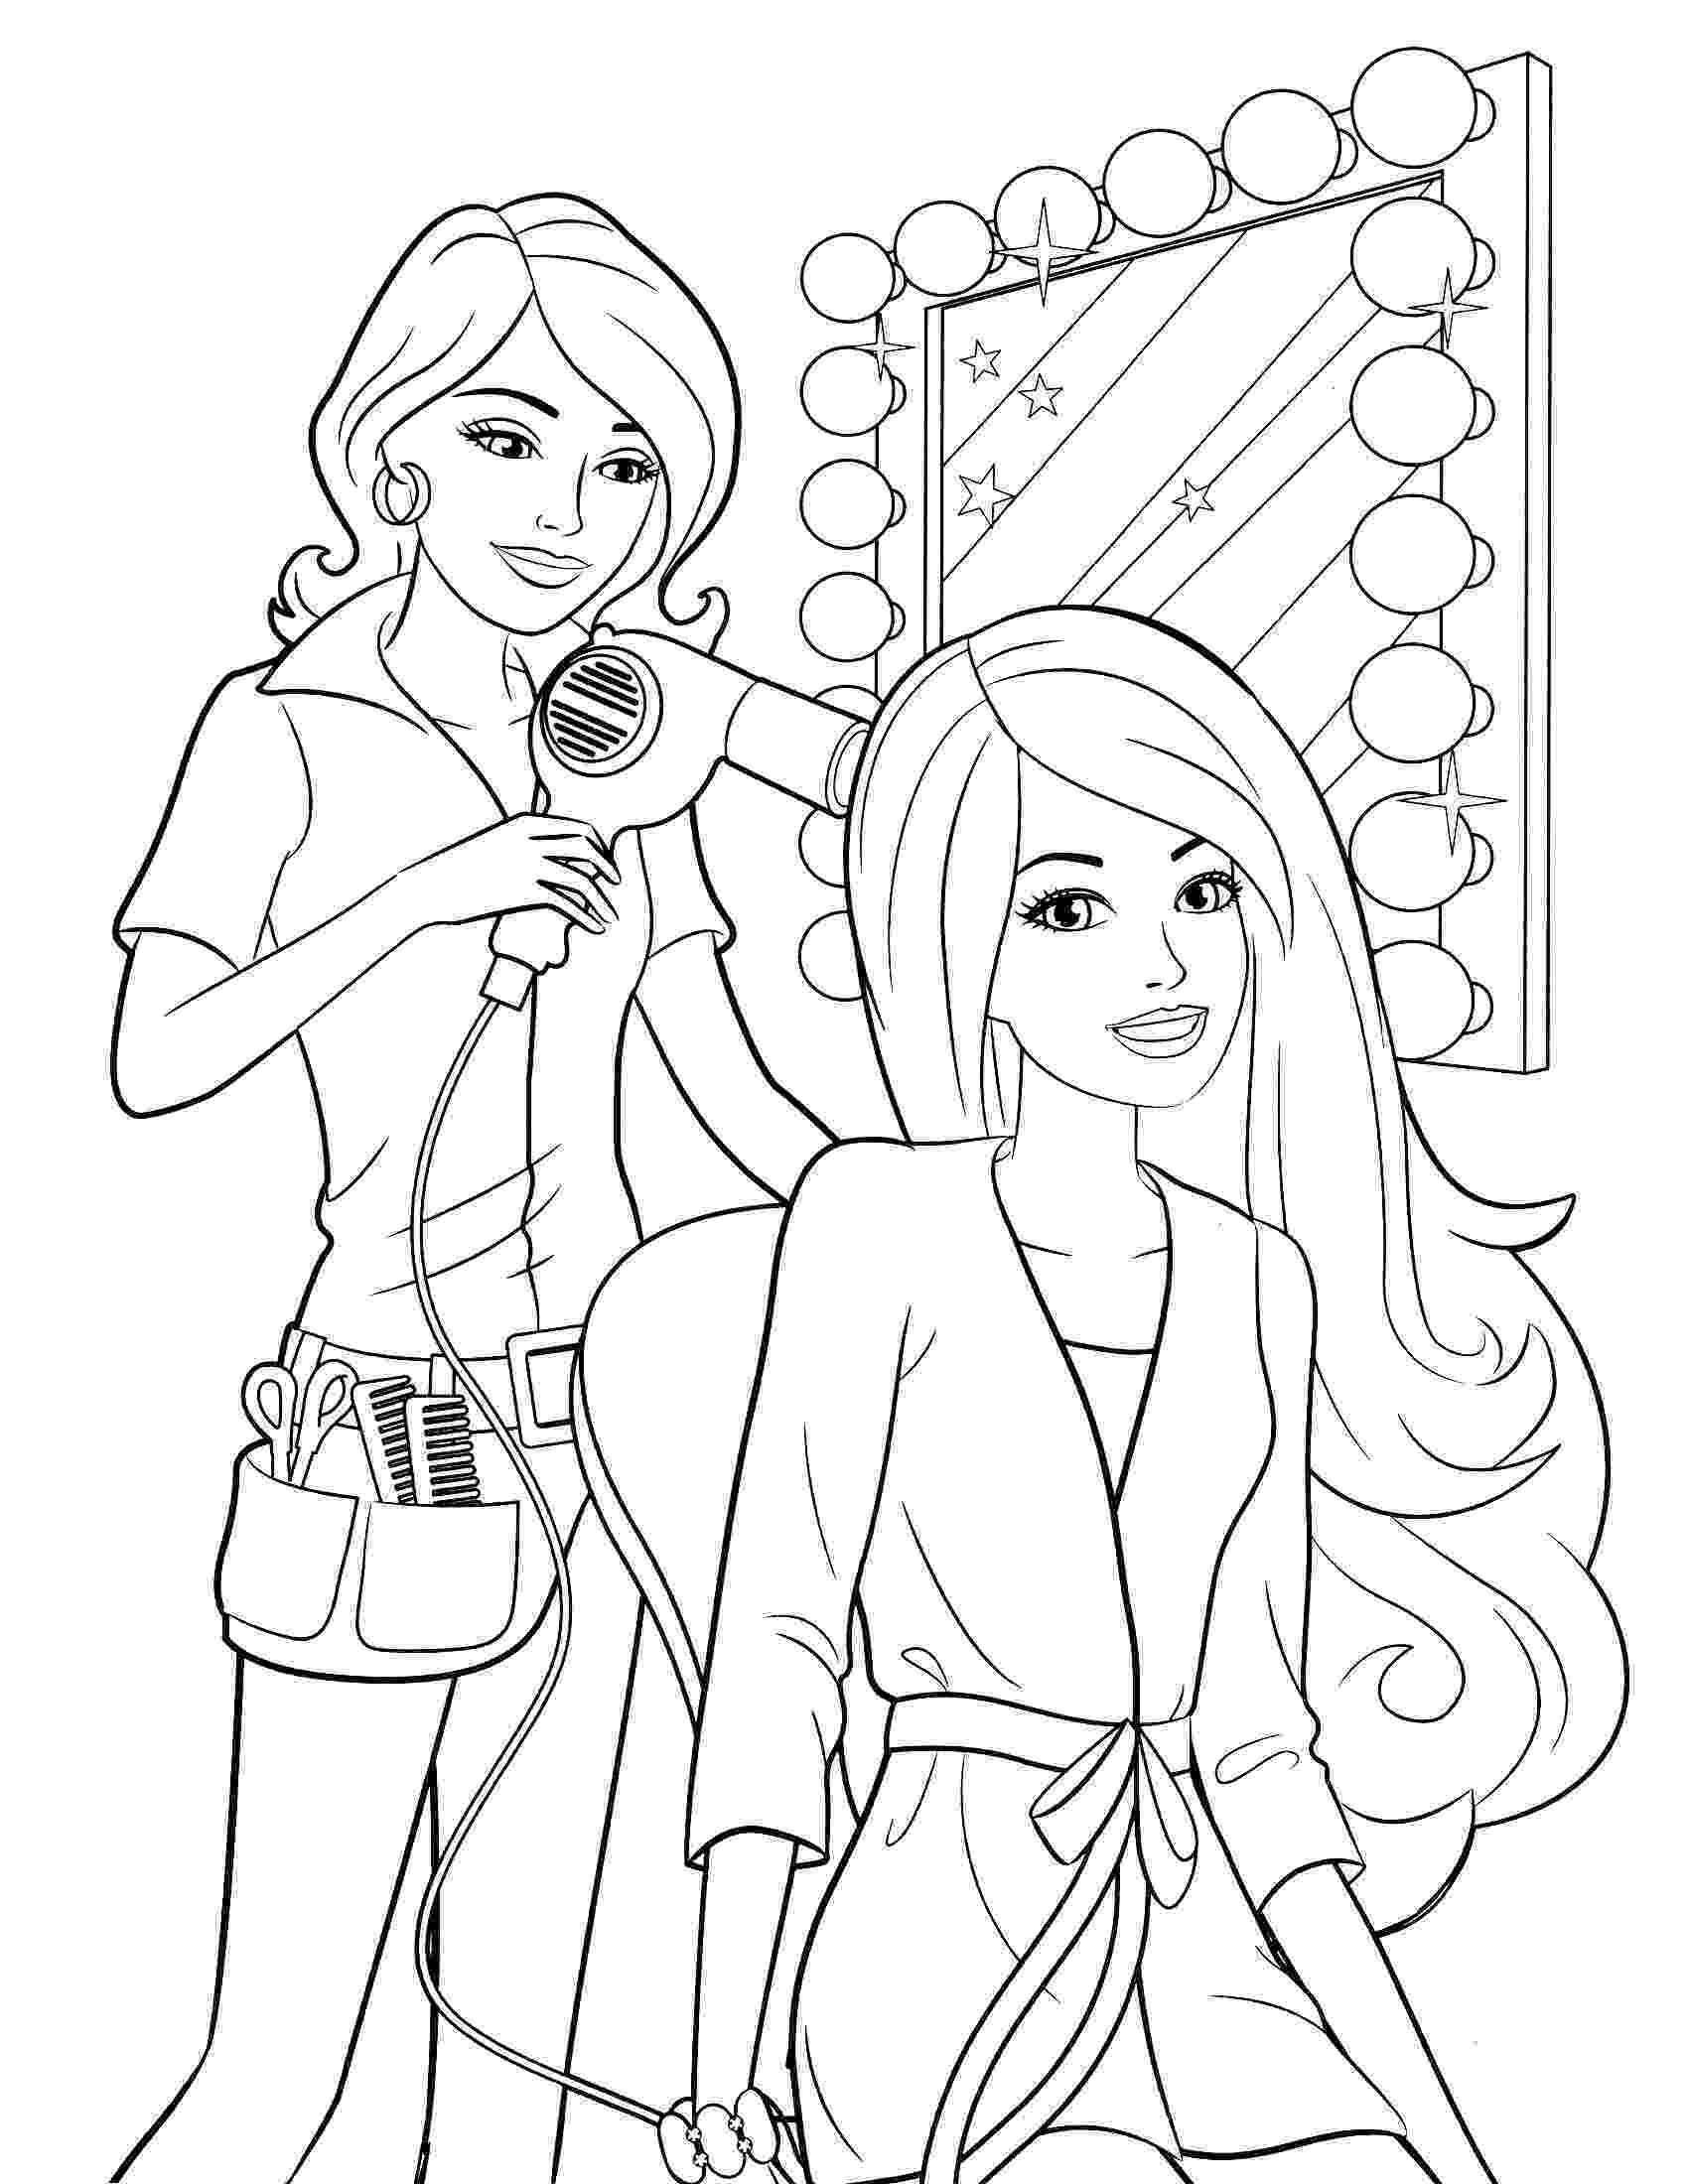 girl colering pages anime coloring pages best coloring pages for kids pages colering girl 